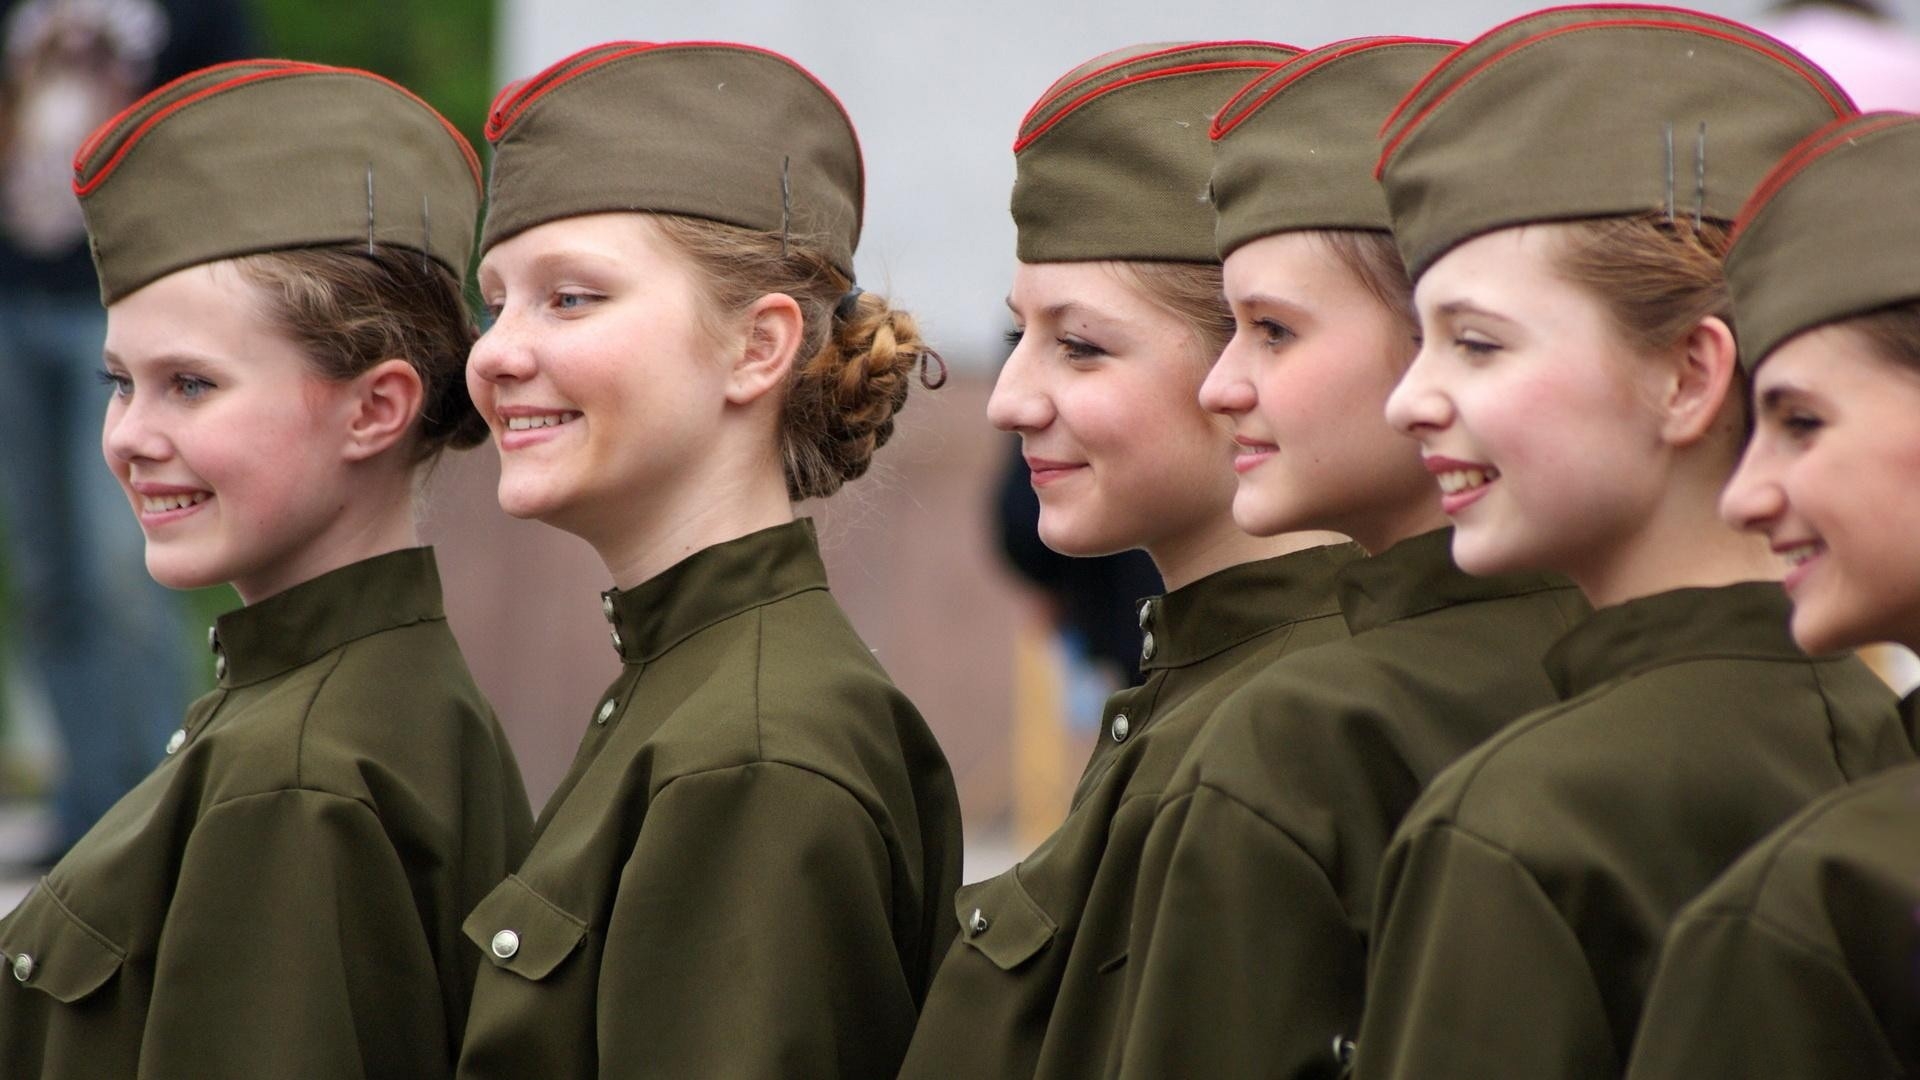 women soldiers uniforms military russia army girls